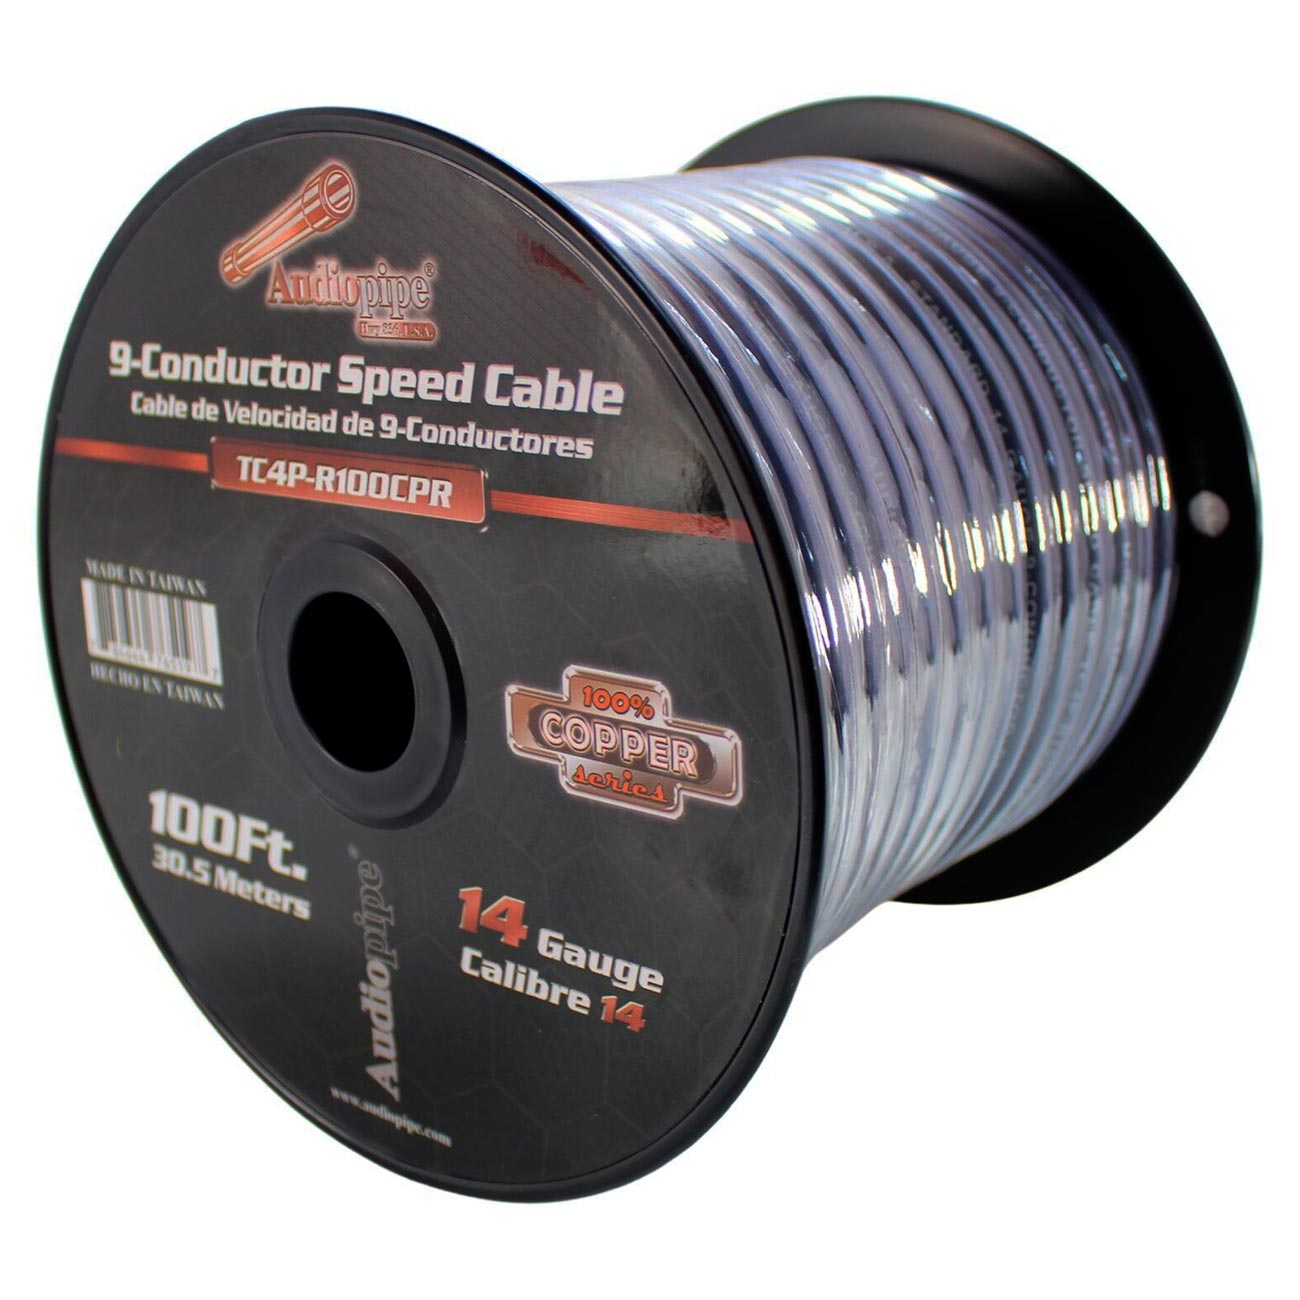 Audiopipe 100% Copper 9-Conductor Speed Cable - 100 Ft